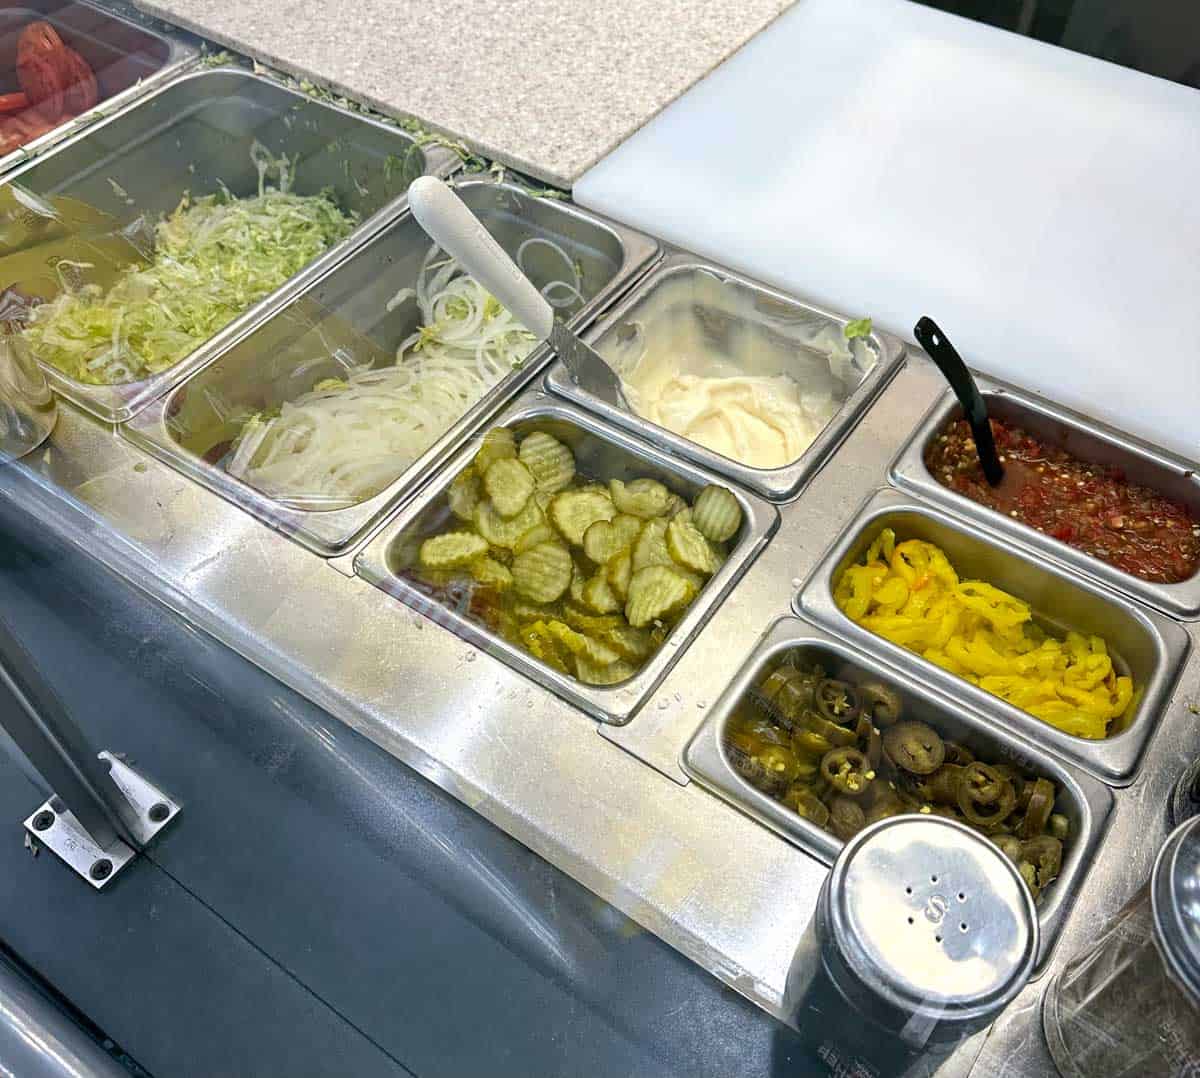 topping bar at jersey mikes